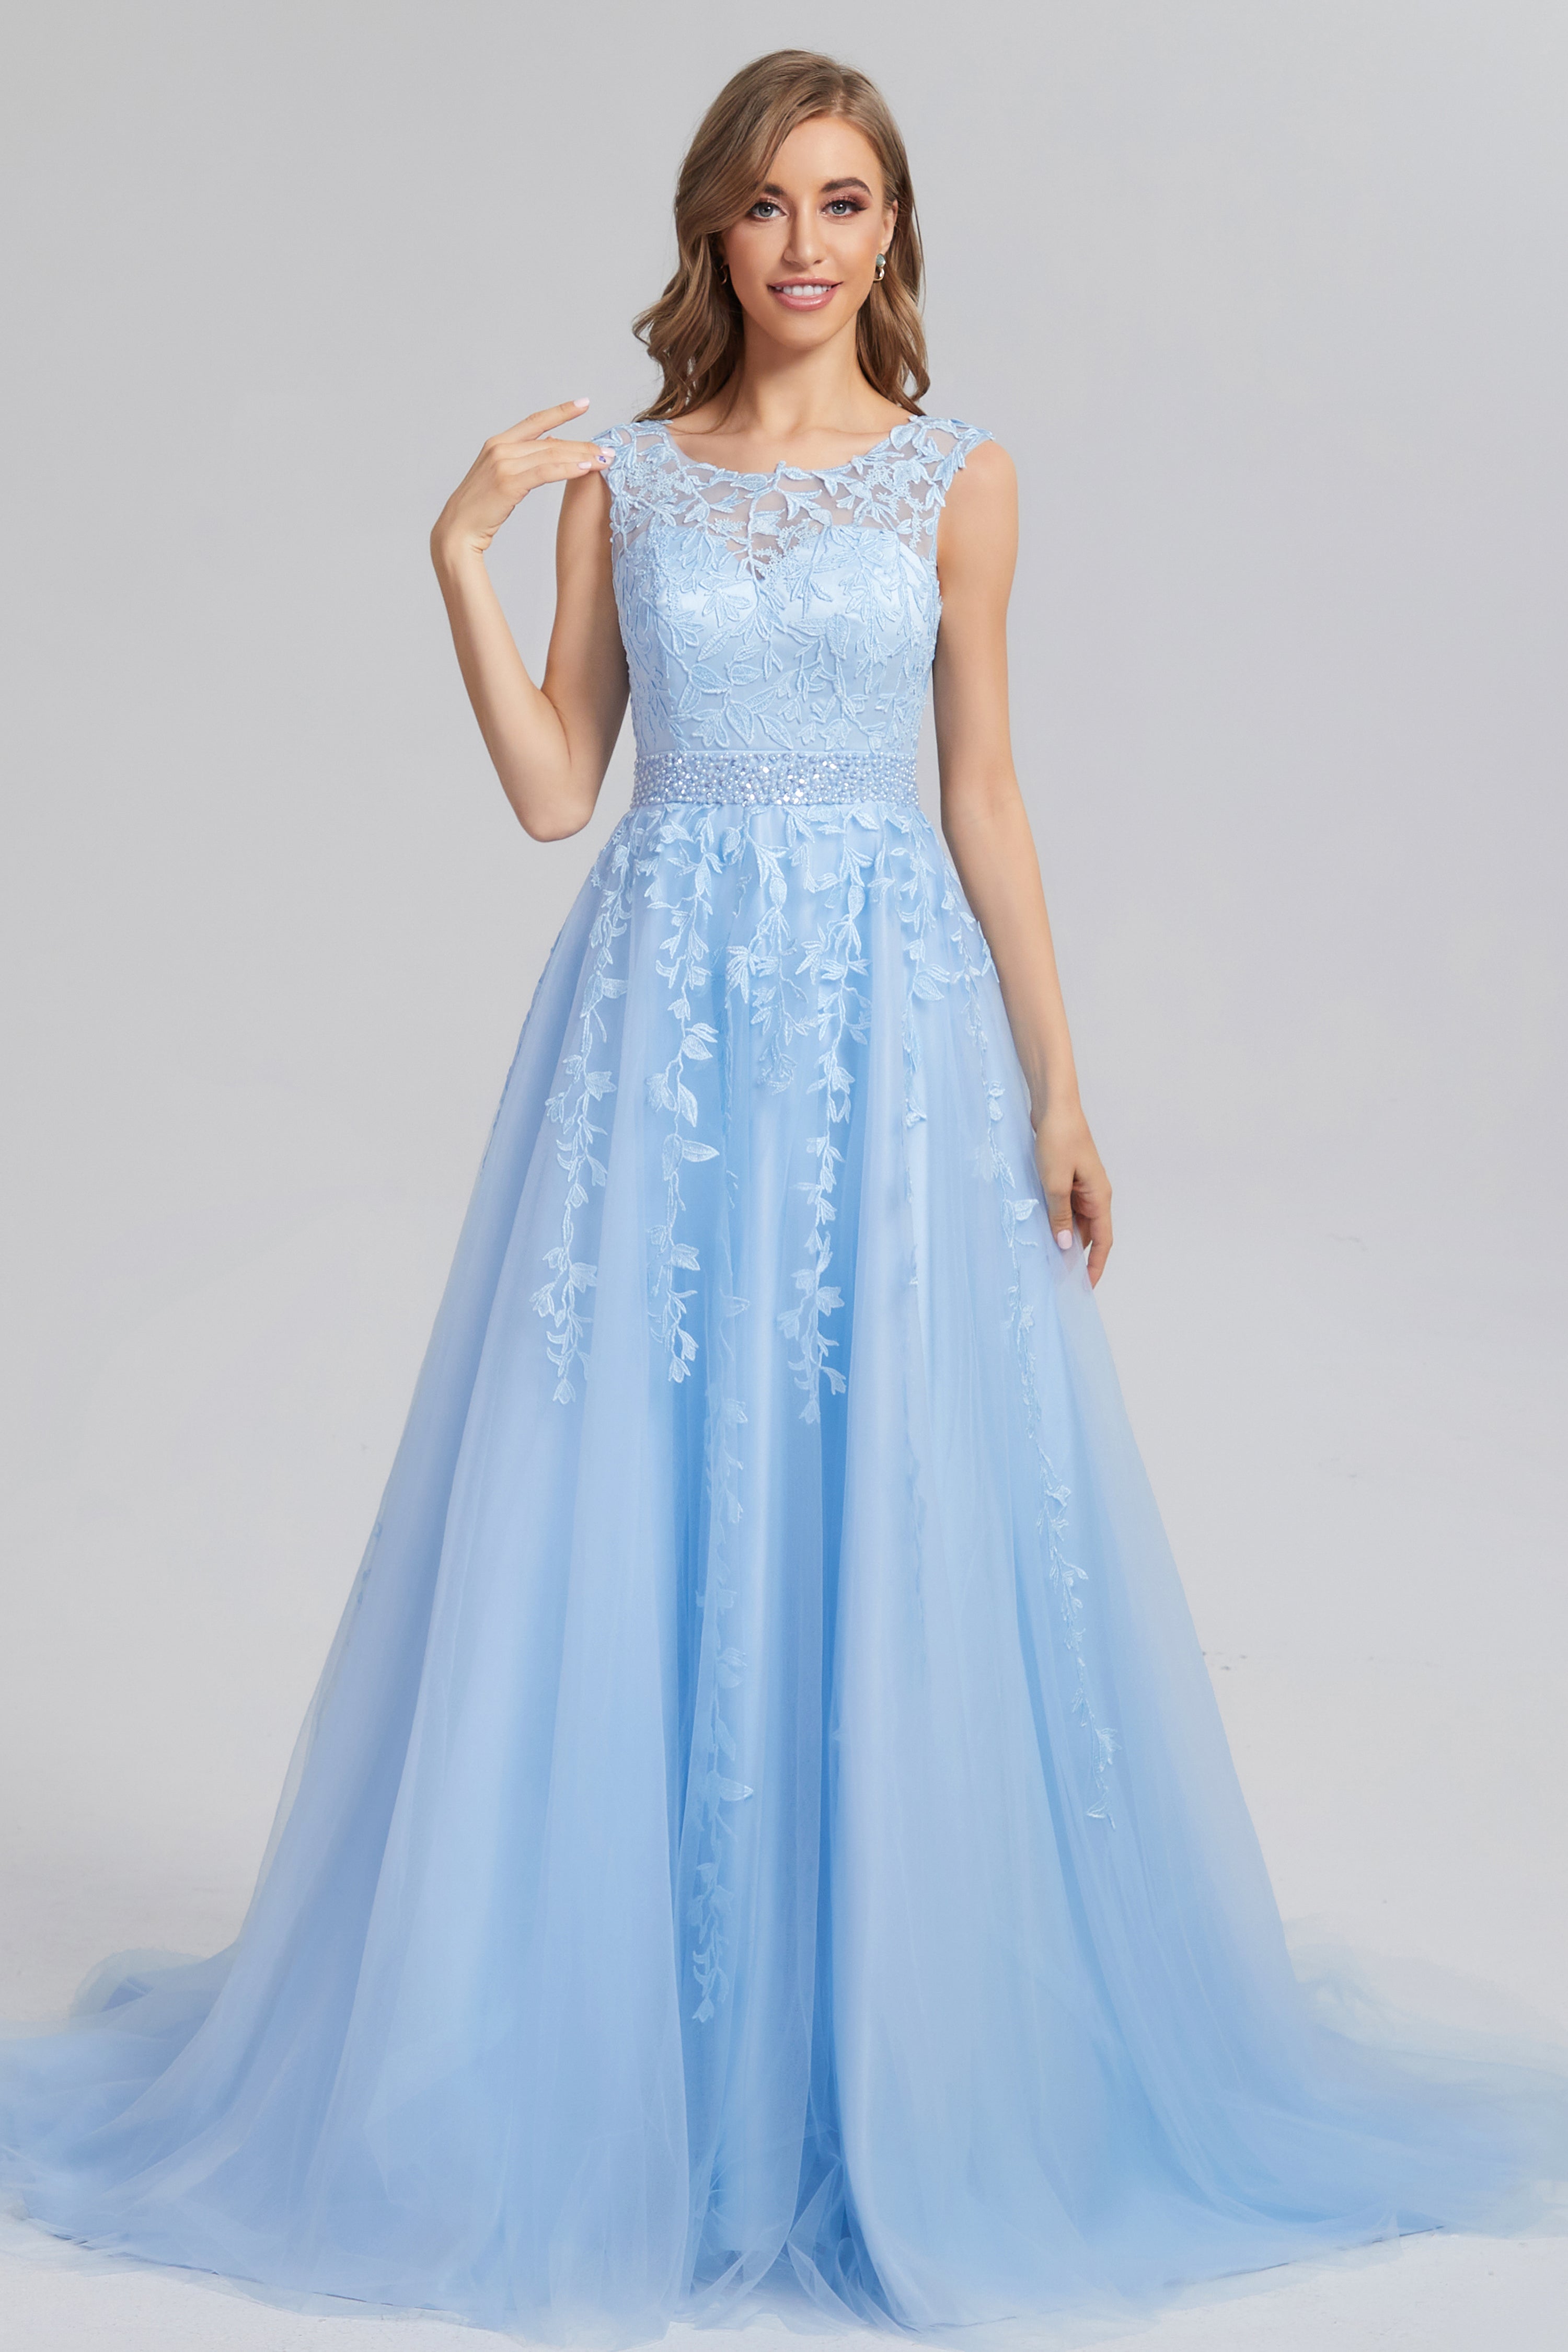 Lace up Appliques Prom Dresses with Pocket